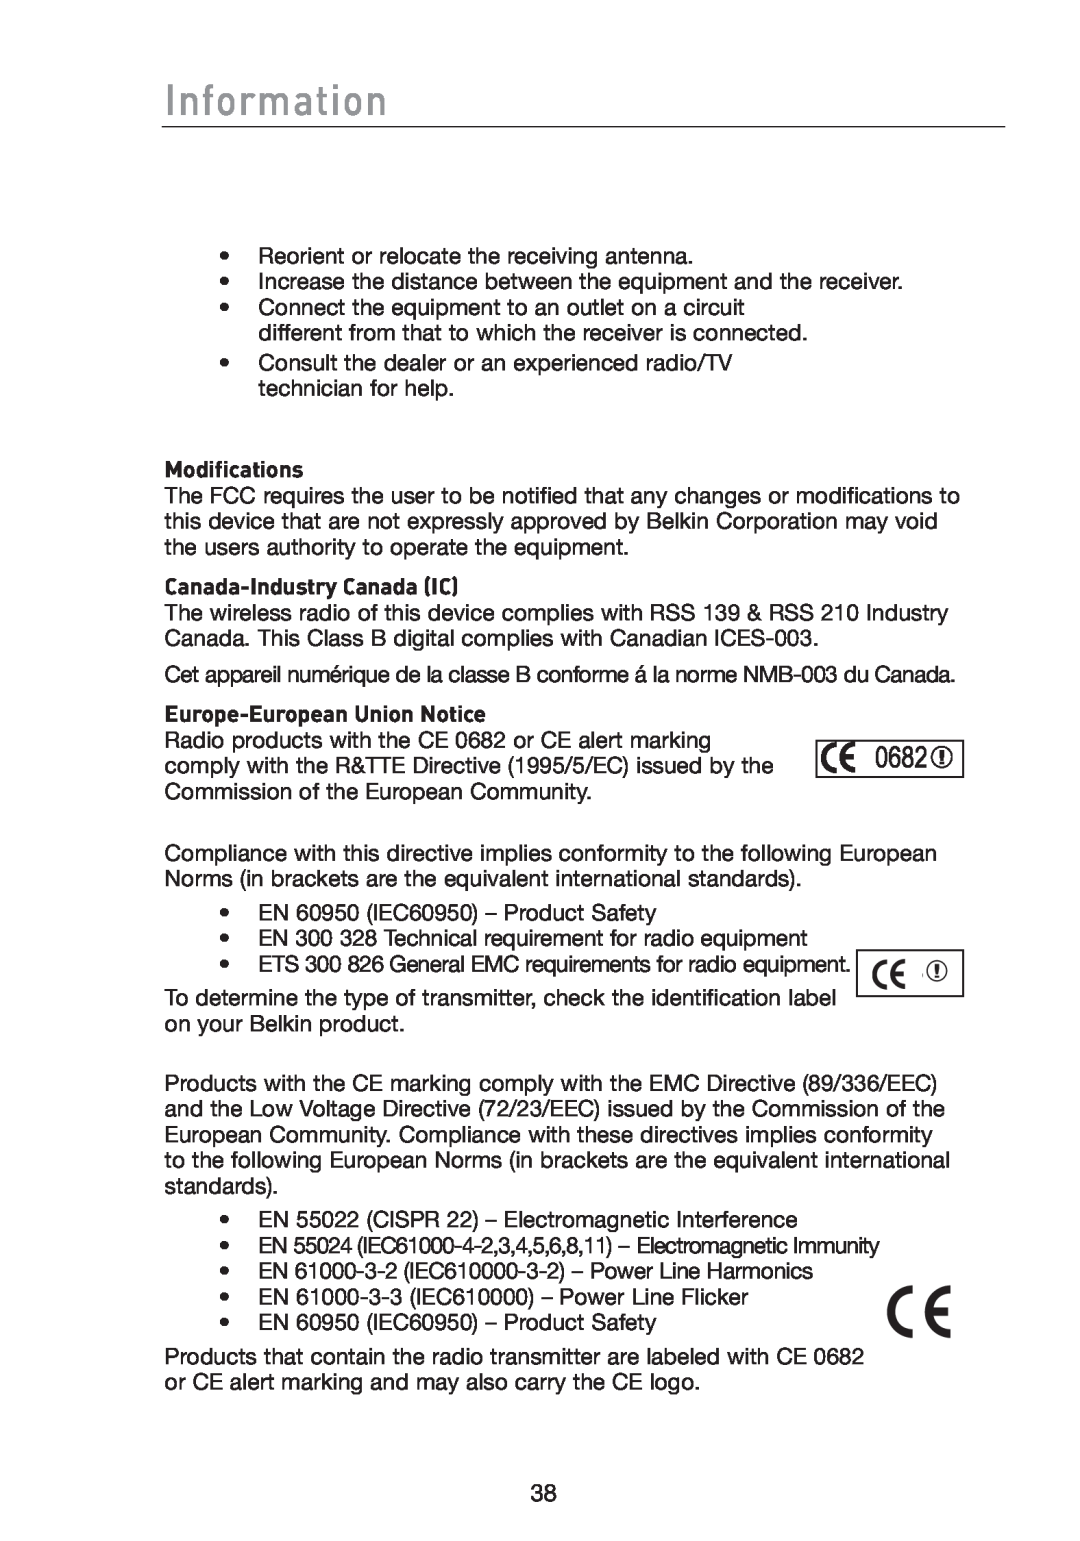 Belkin F5D7051 manual Information, Modifications, Canada-Industry Canada IC, Europe-European Union Notice 